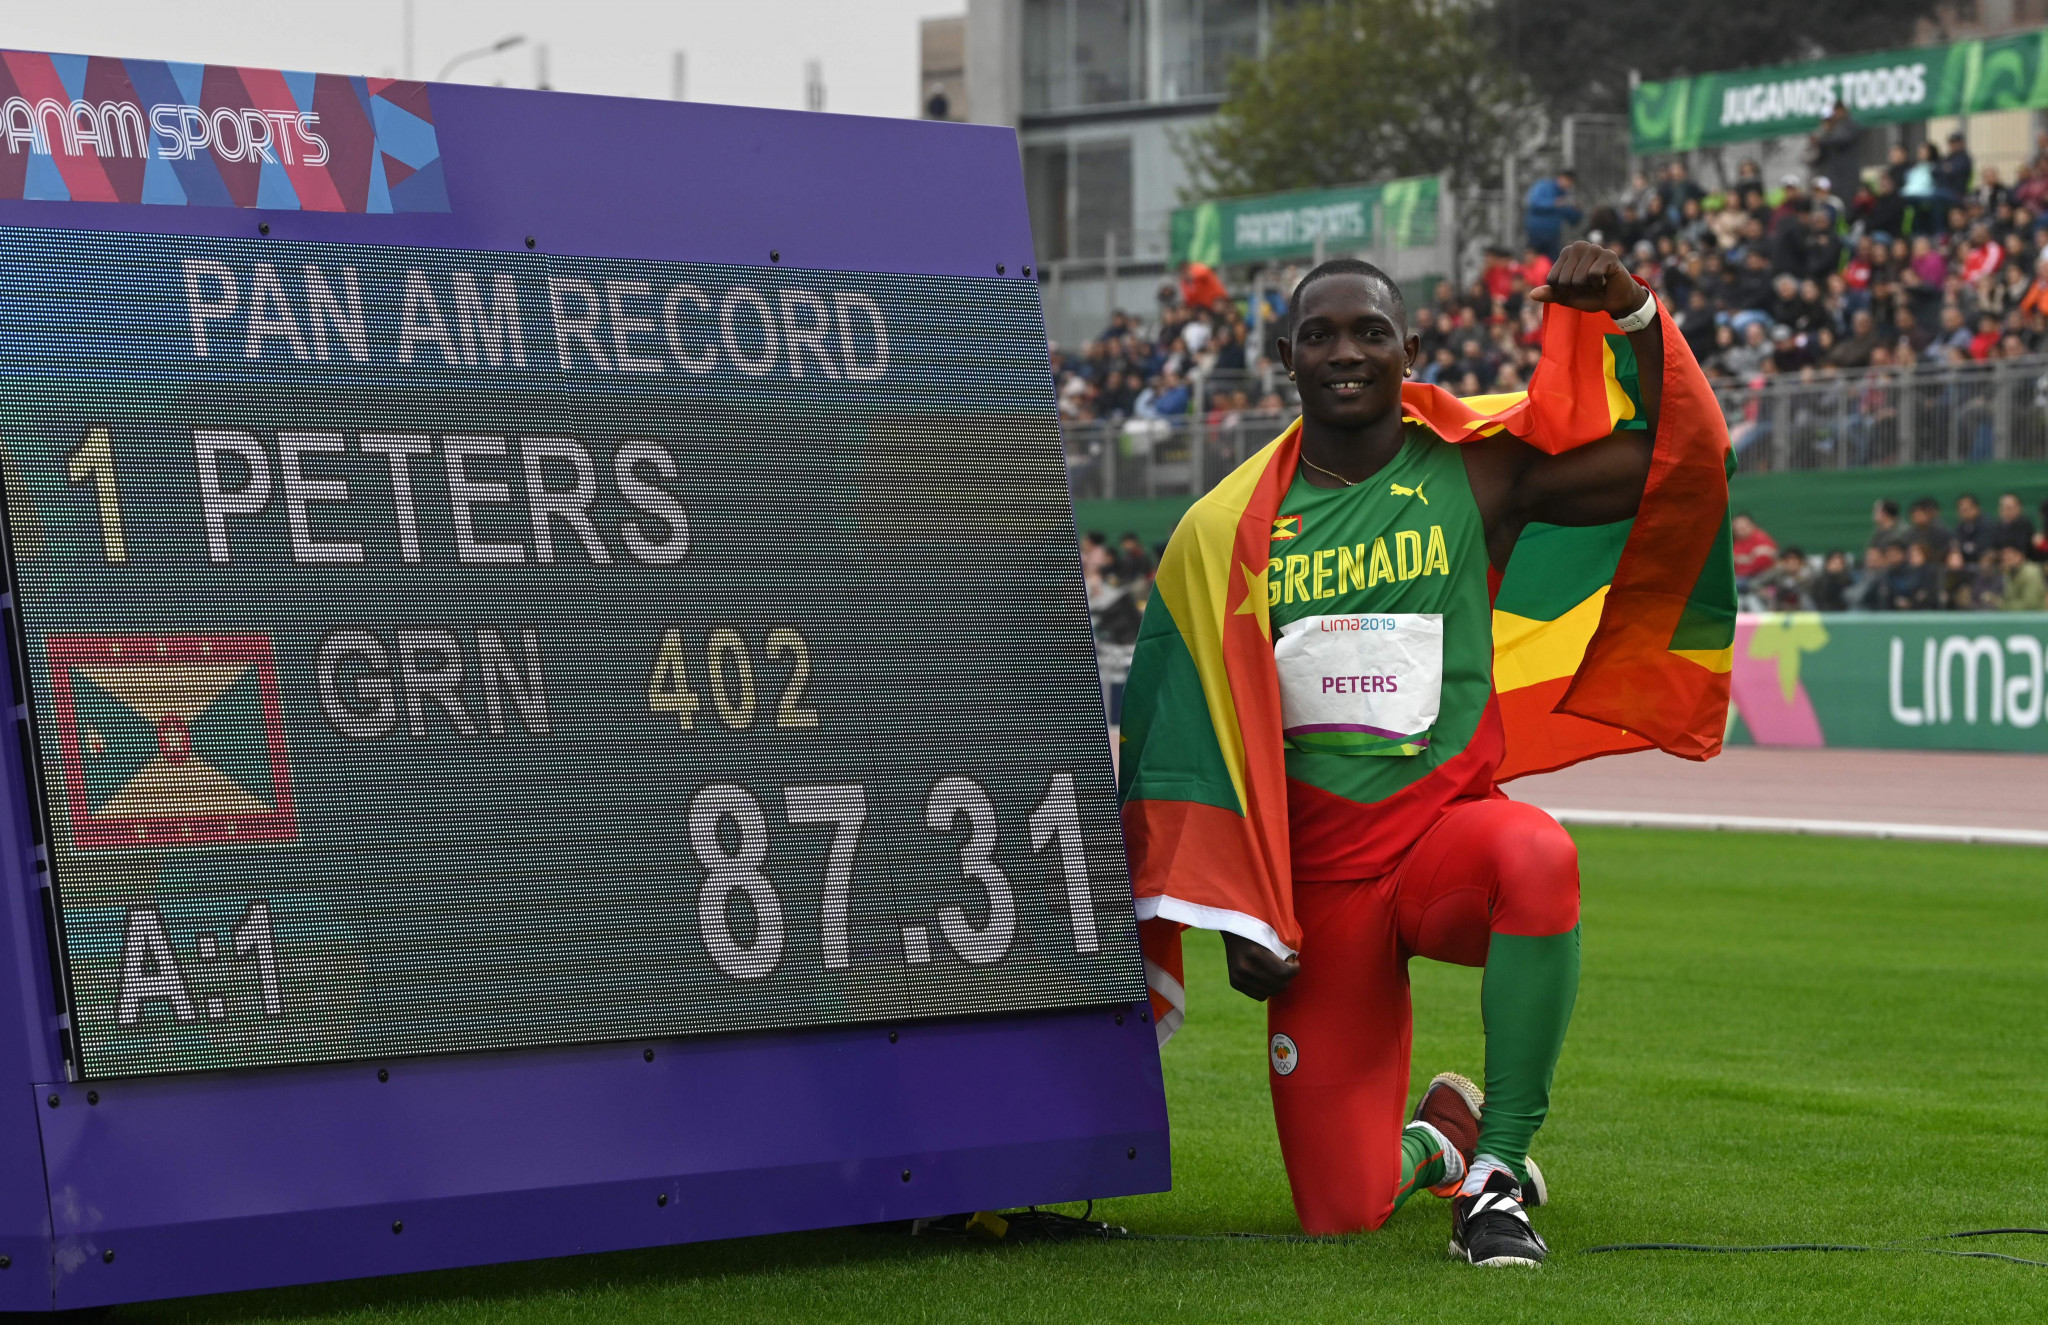 Grenada's Anderson Peters won the men's javelin in a Games record ©Getty Images